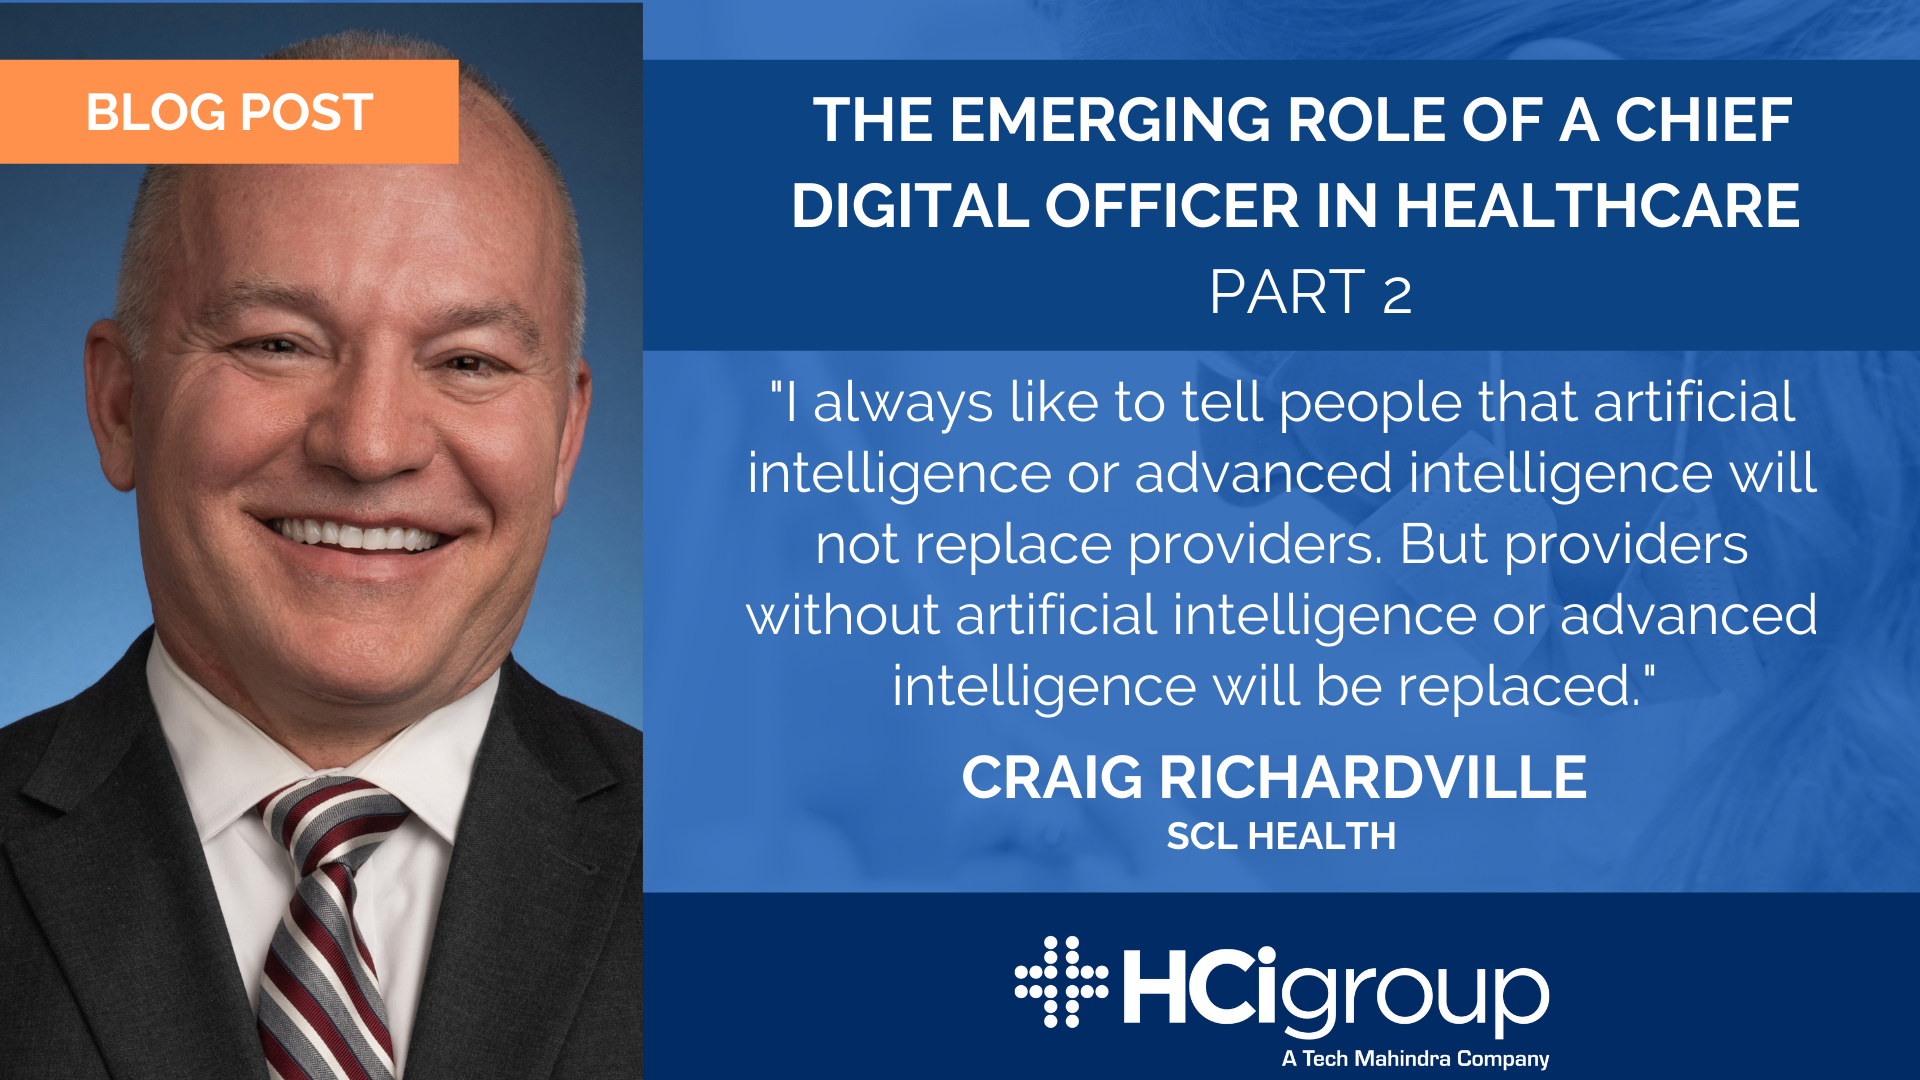 The Emerging Role of a Chief Digital Officer in Healthcare: A Conversation with Craig Richardville - Part II